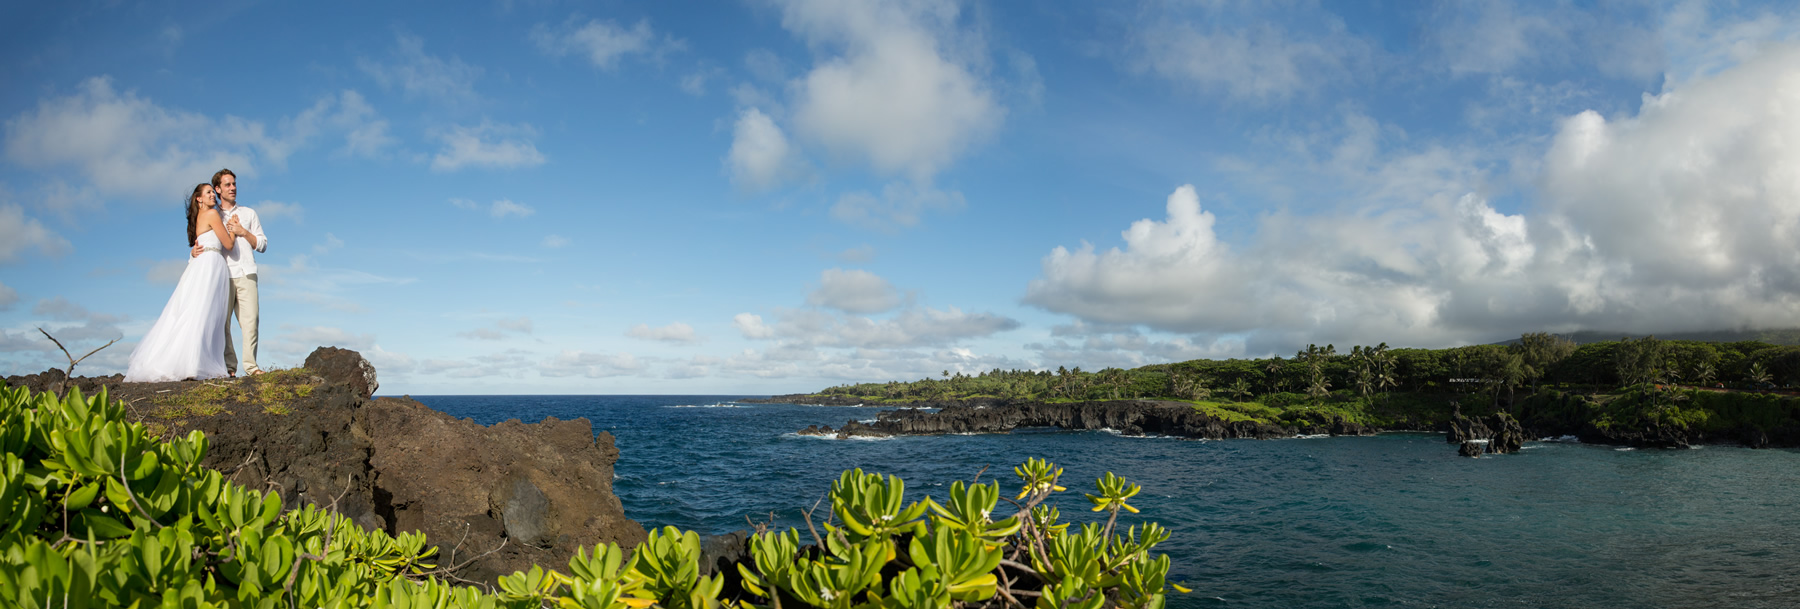 A bride and groom pose on a cliff over a dramatic sea in Hana, Maui.